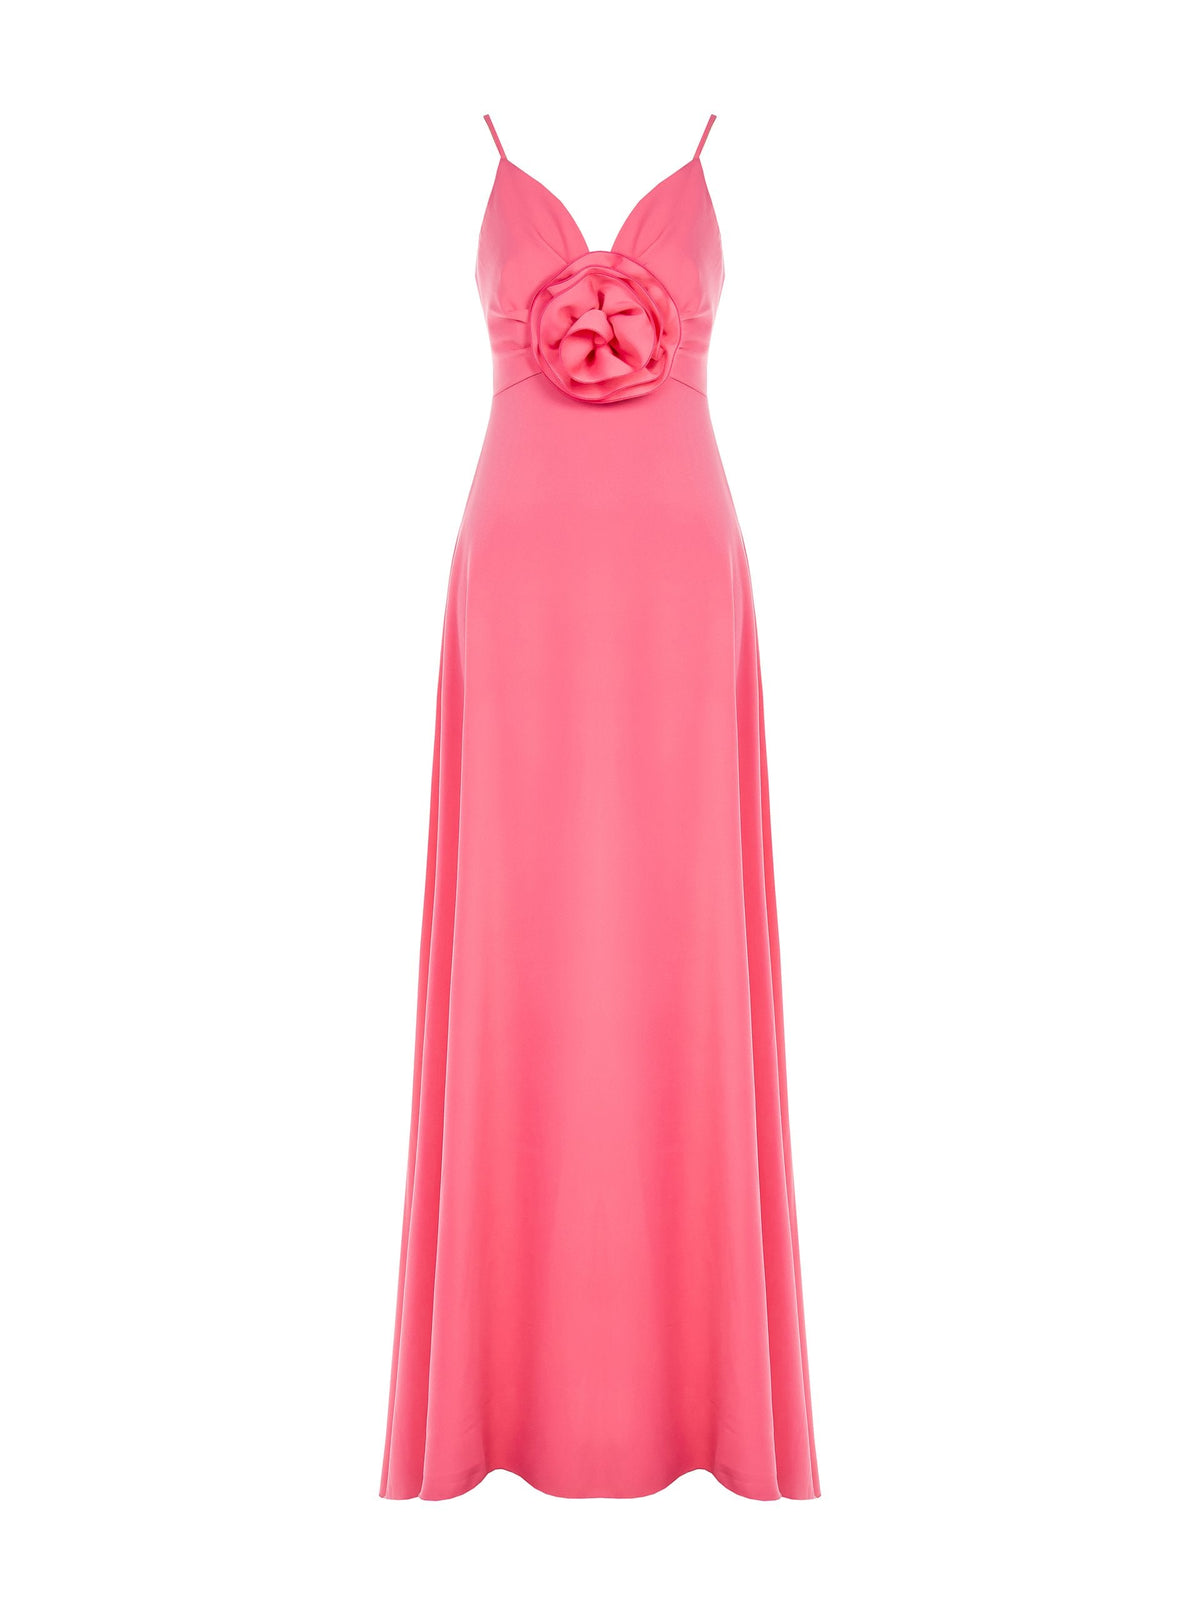 Opaque Long Satin Dress with Flower Brooch